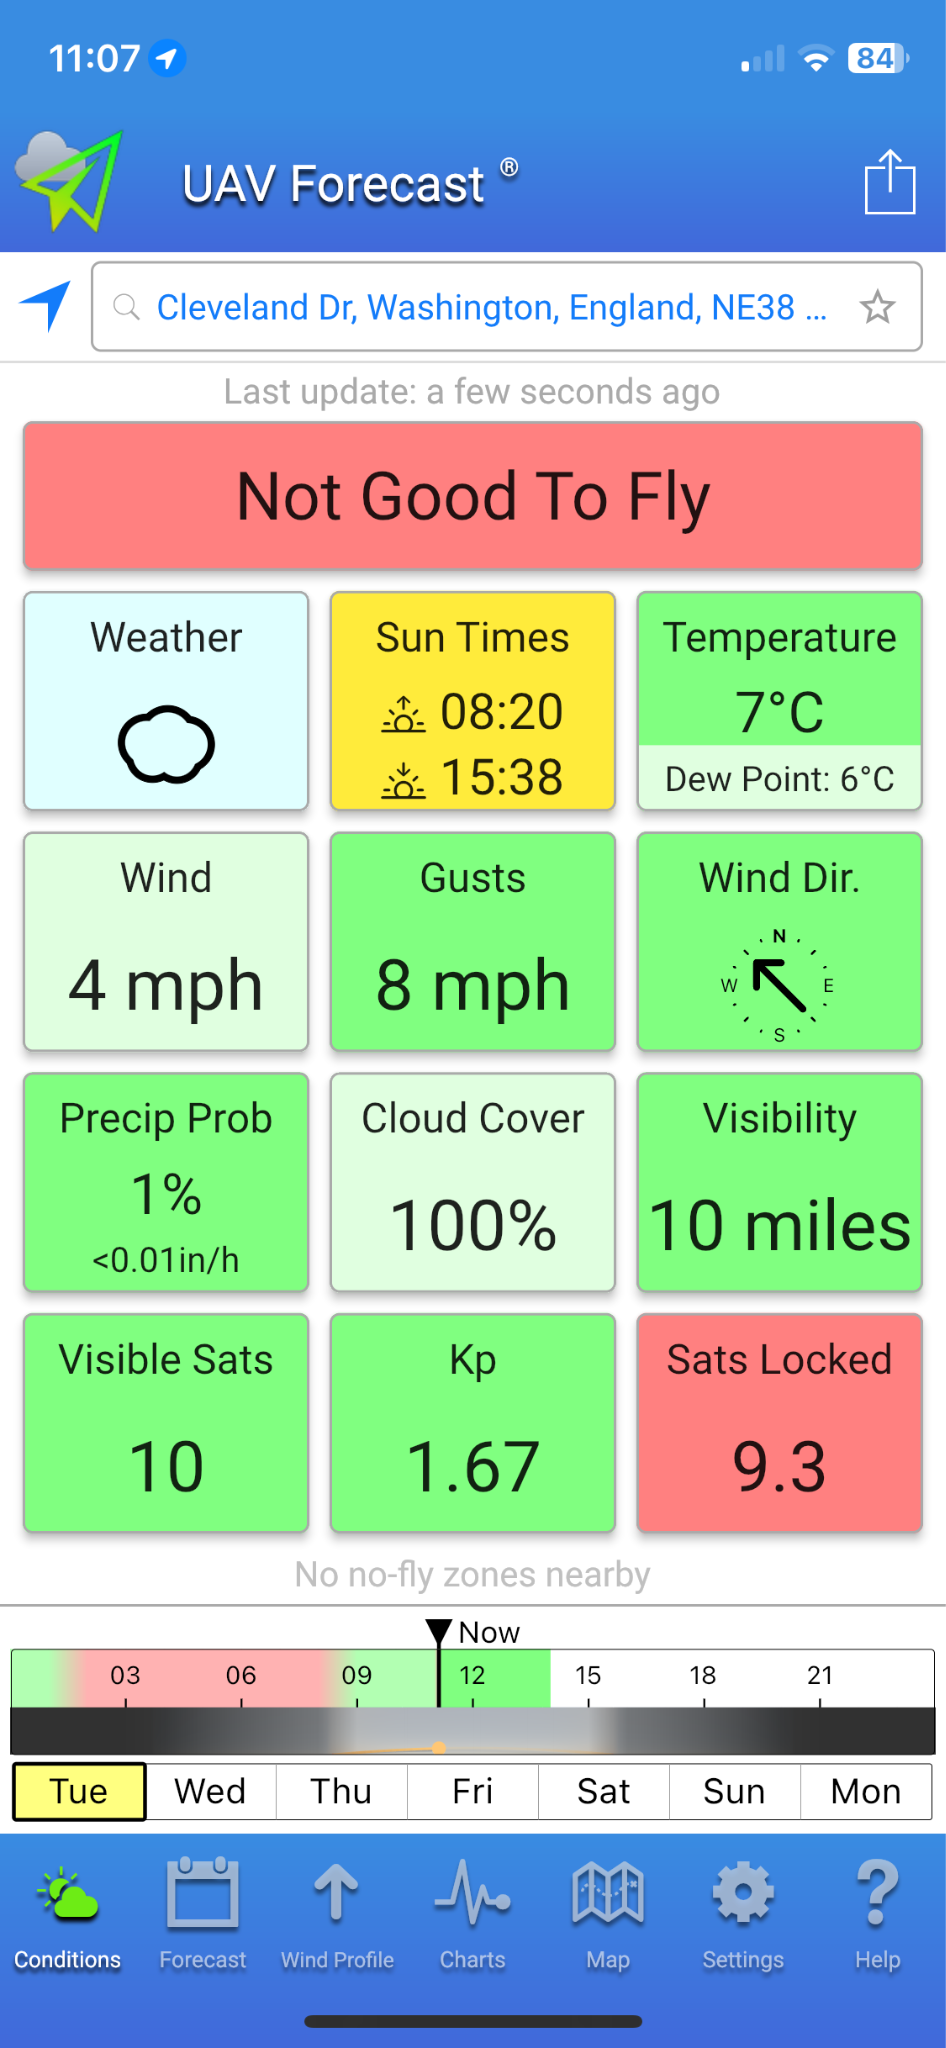 A drone weather forecast app showing that it is not safe to fly